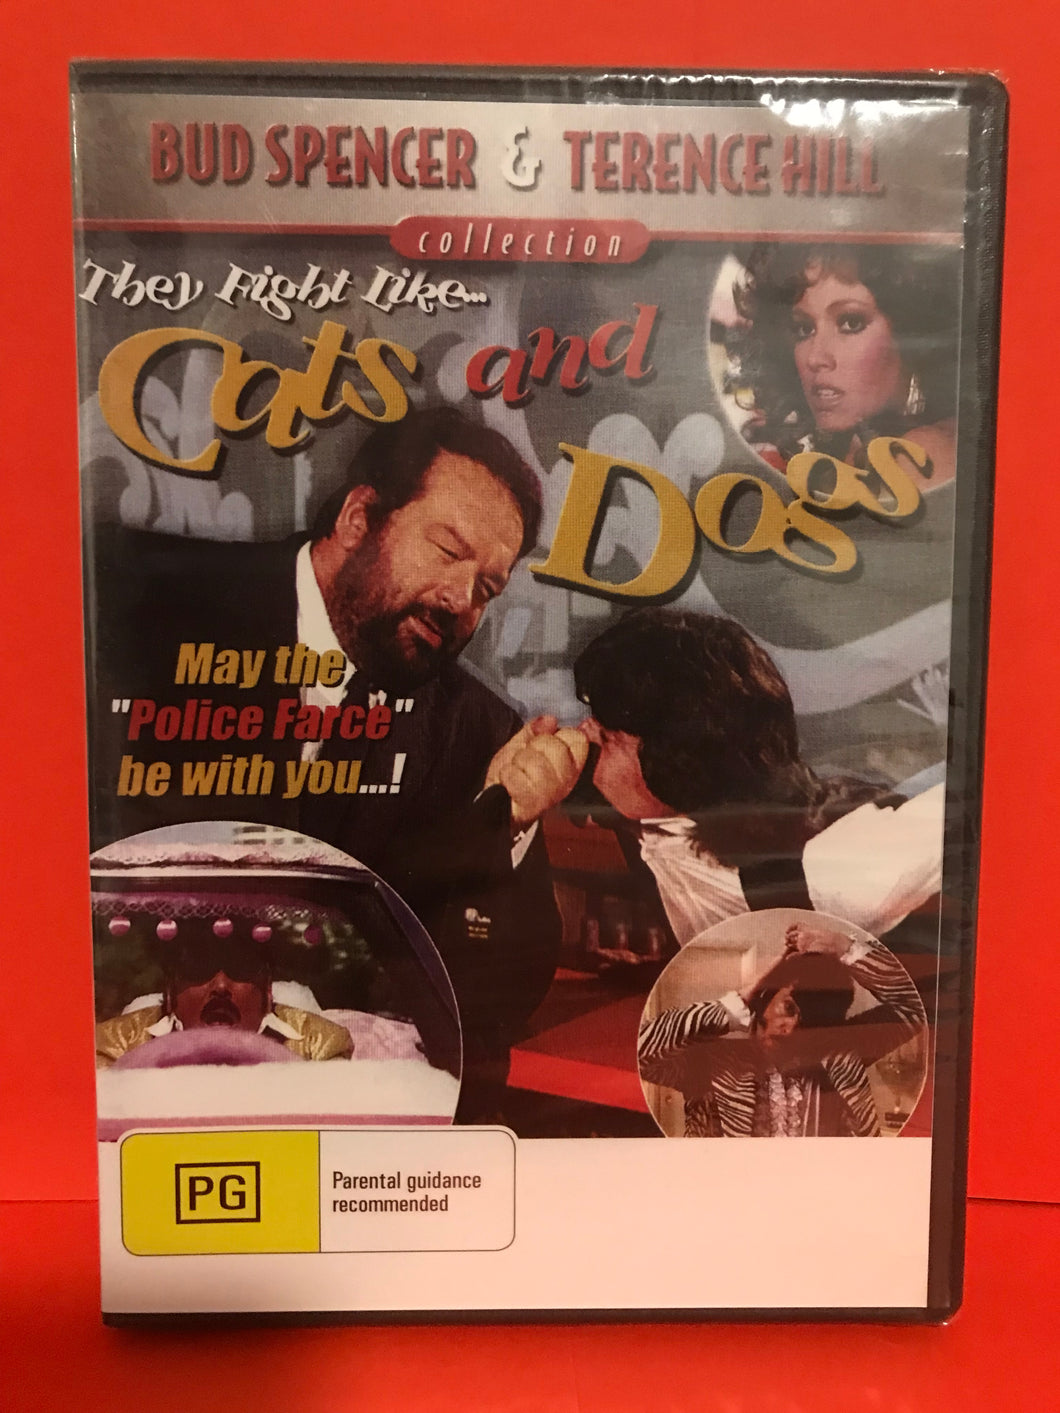 CATS AND DOGS DVD BUD SPENCER